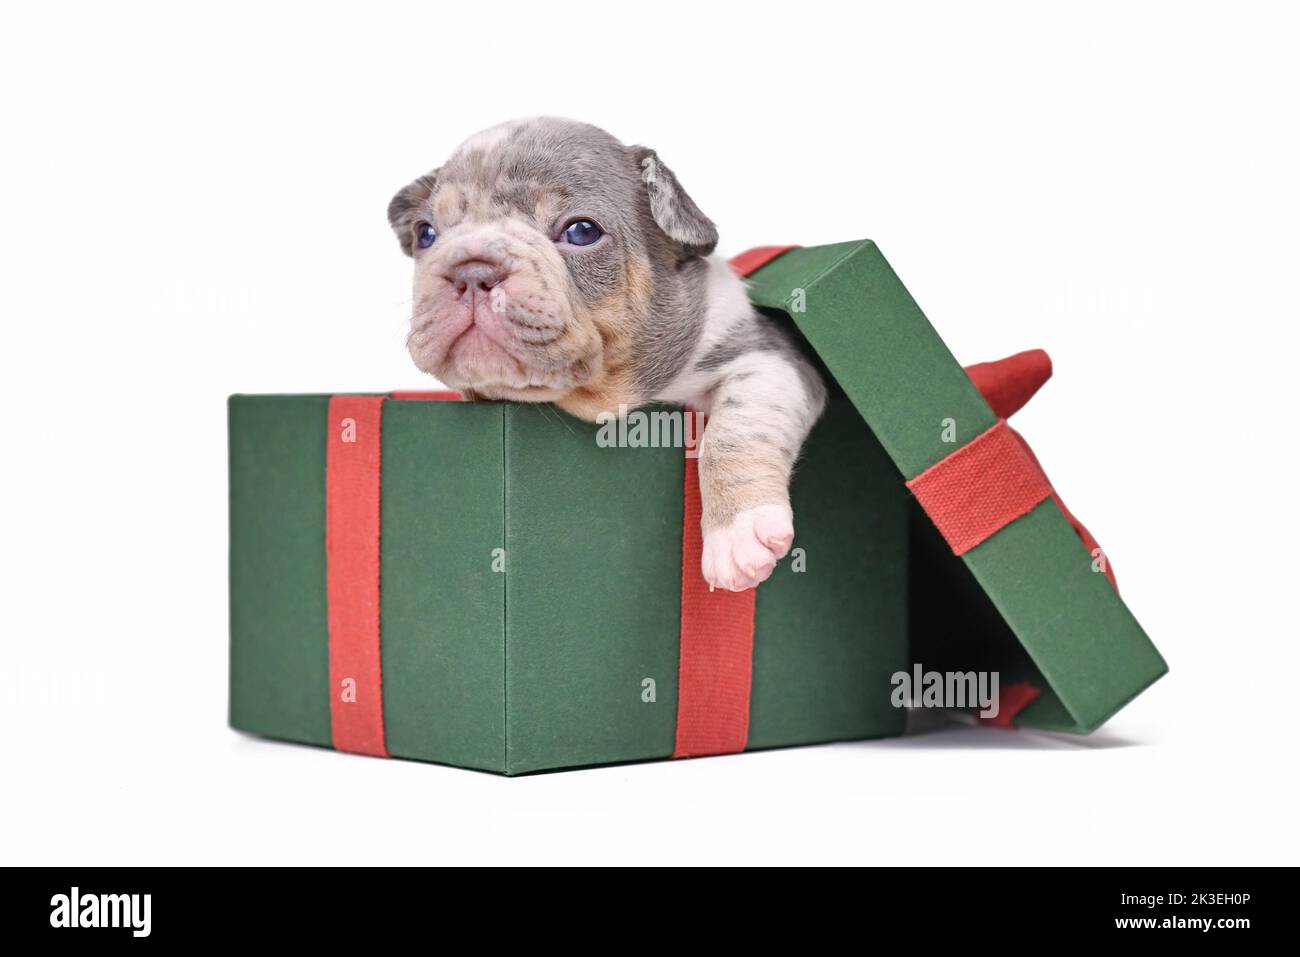 Blue merle tan French Bulldog dog puppy in green Christmas gift box on white background Stock Photo